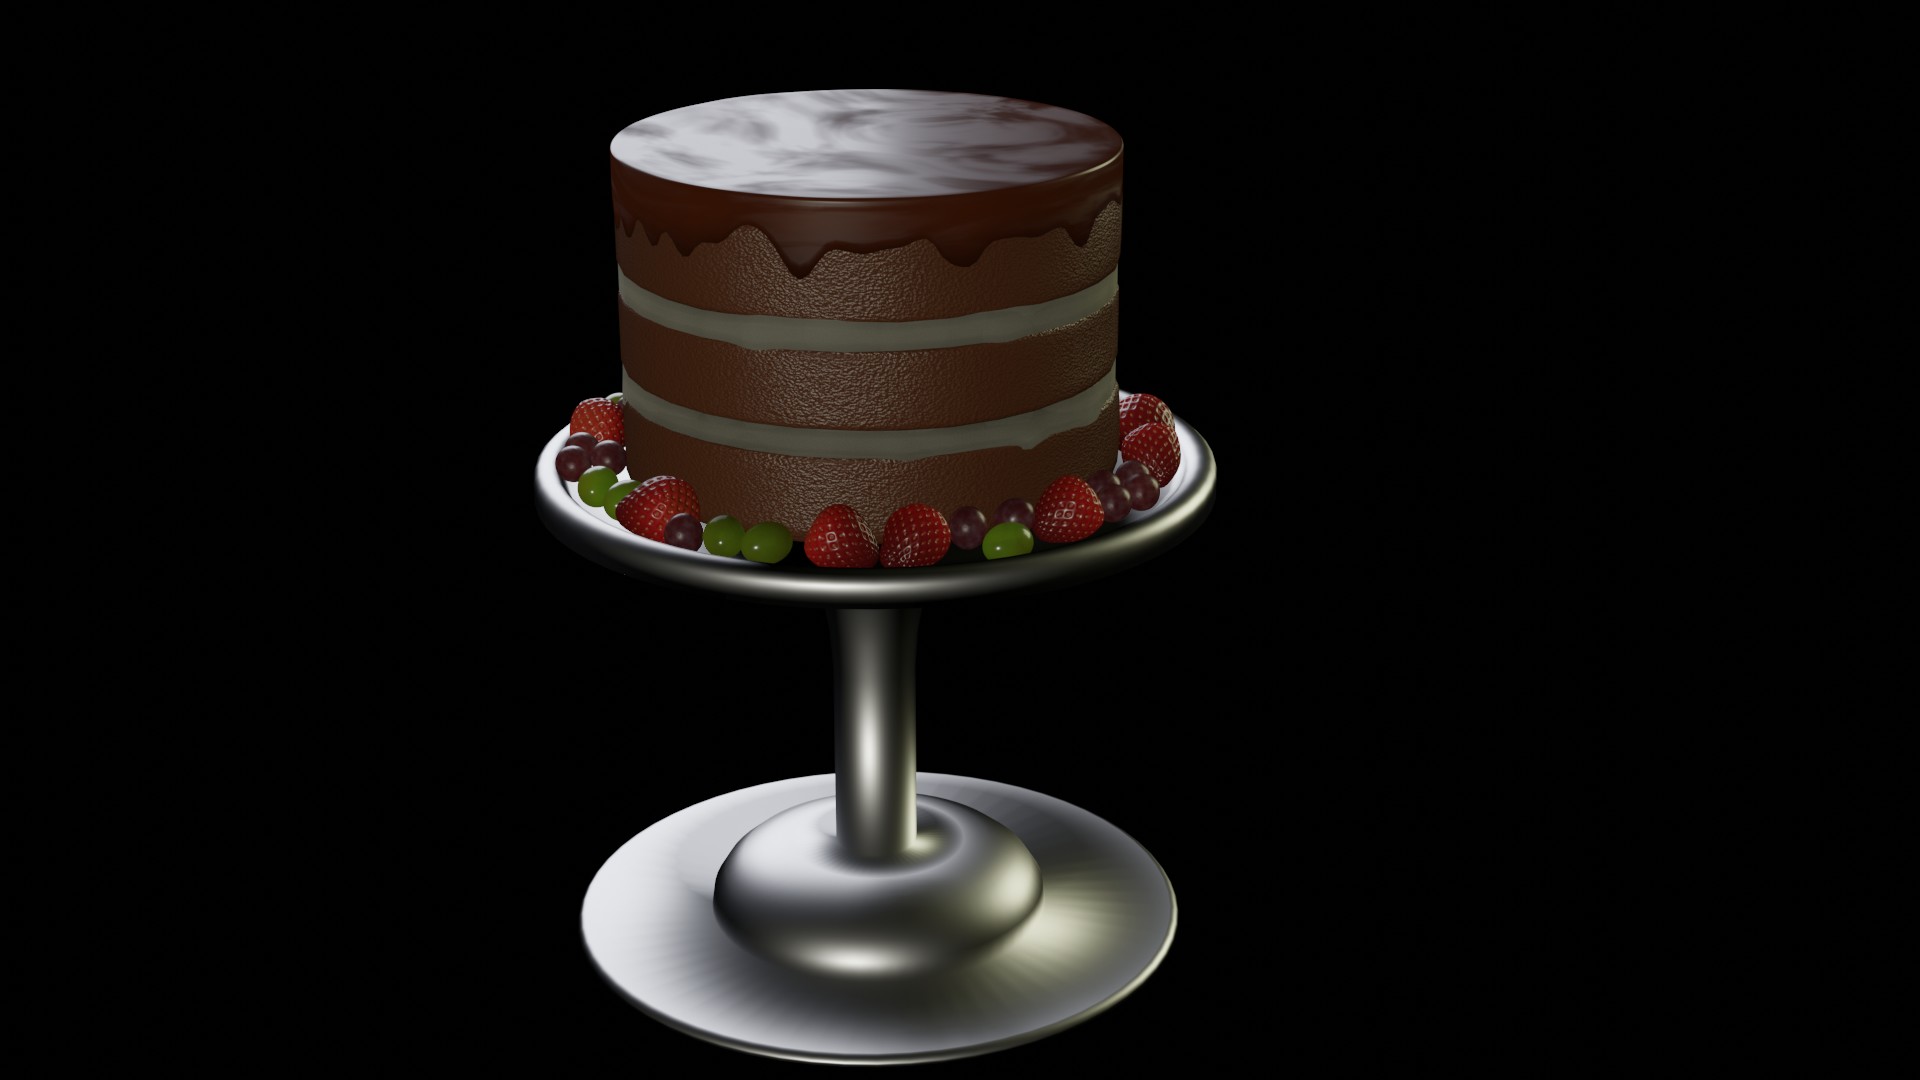 Chocolate cake preview image 1